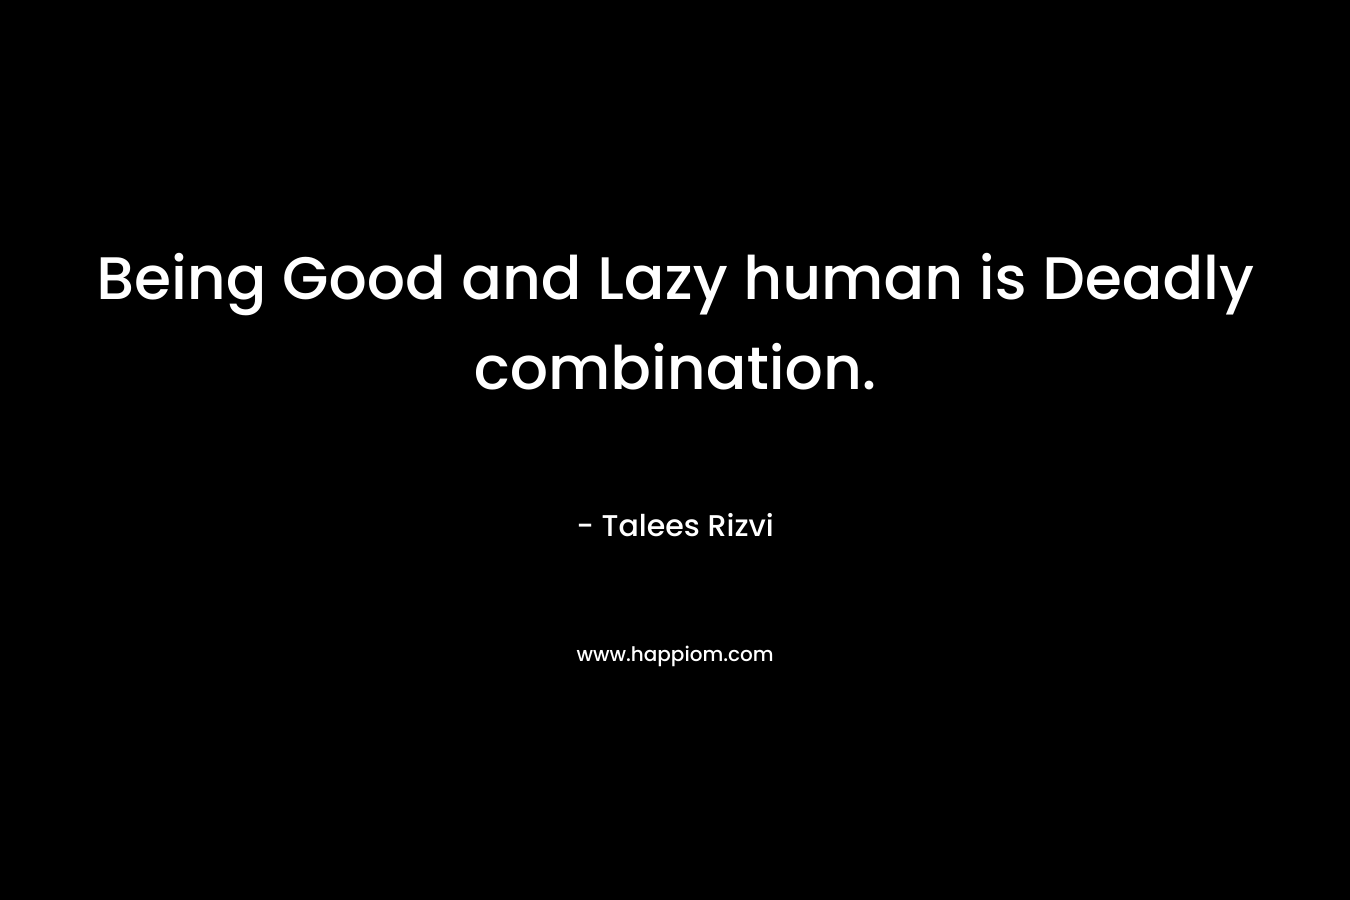 Being Good and Lazy human is Deadly combination.